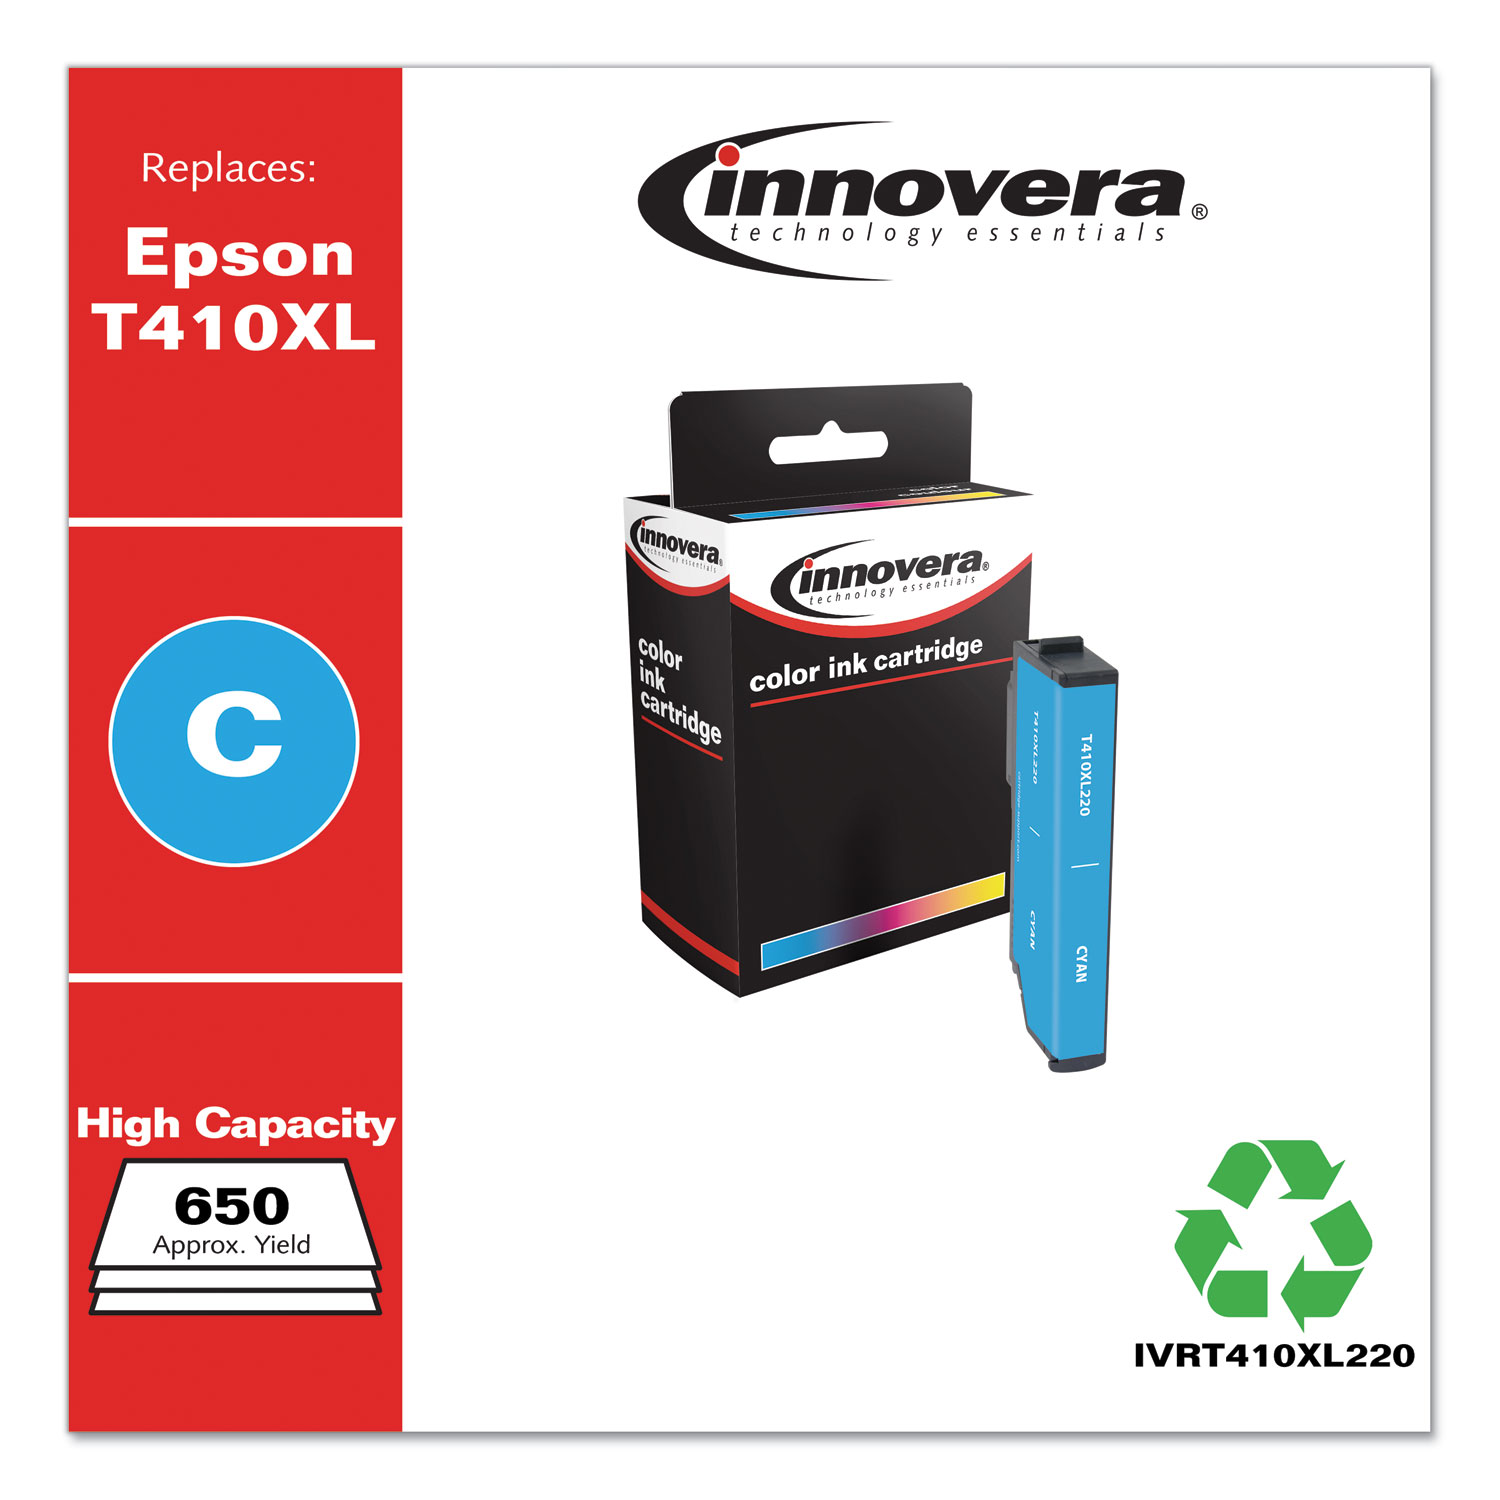  Innovera IVRT410XL220 Remanufactured Cyan High-Yield Ink, Replacement for Epson T410XL (T410XL220), 650 Page-Yield (IVRT410XL220) 